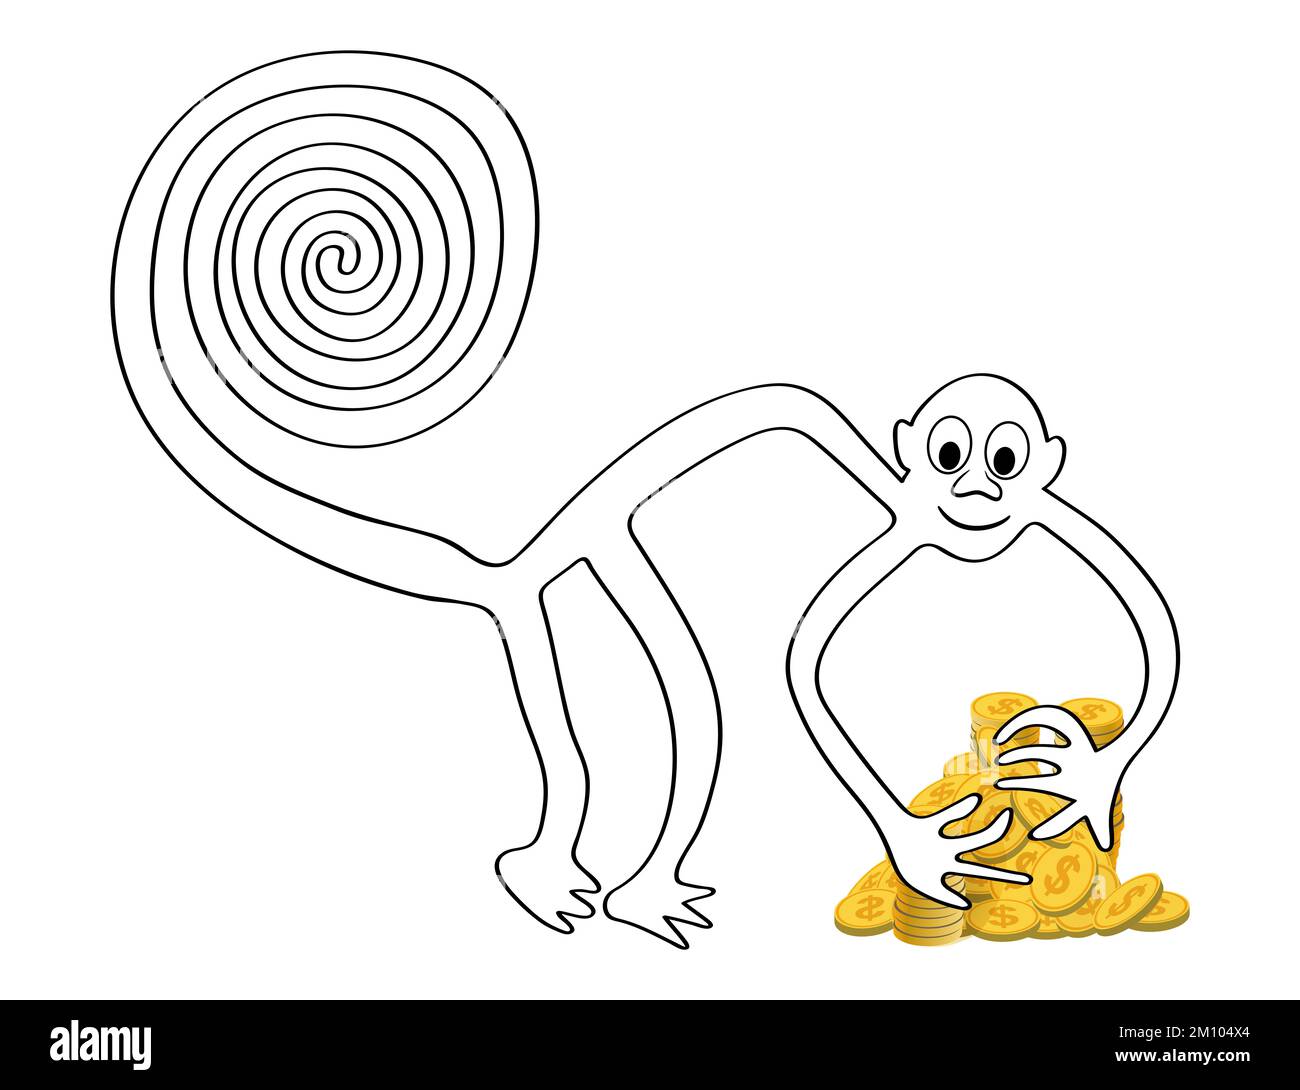 Monkey with a pile of golden coins - a paraphrase of the famous geoglyph The Monkey from Nazca, Nazca desert, Peru Stock Photo